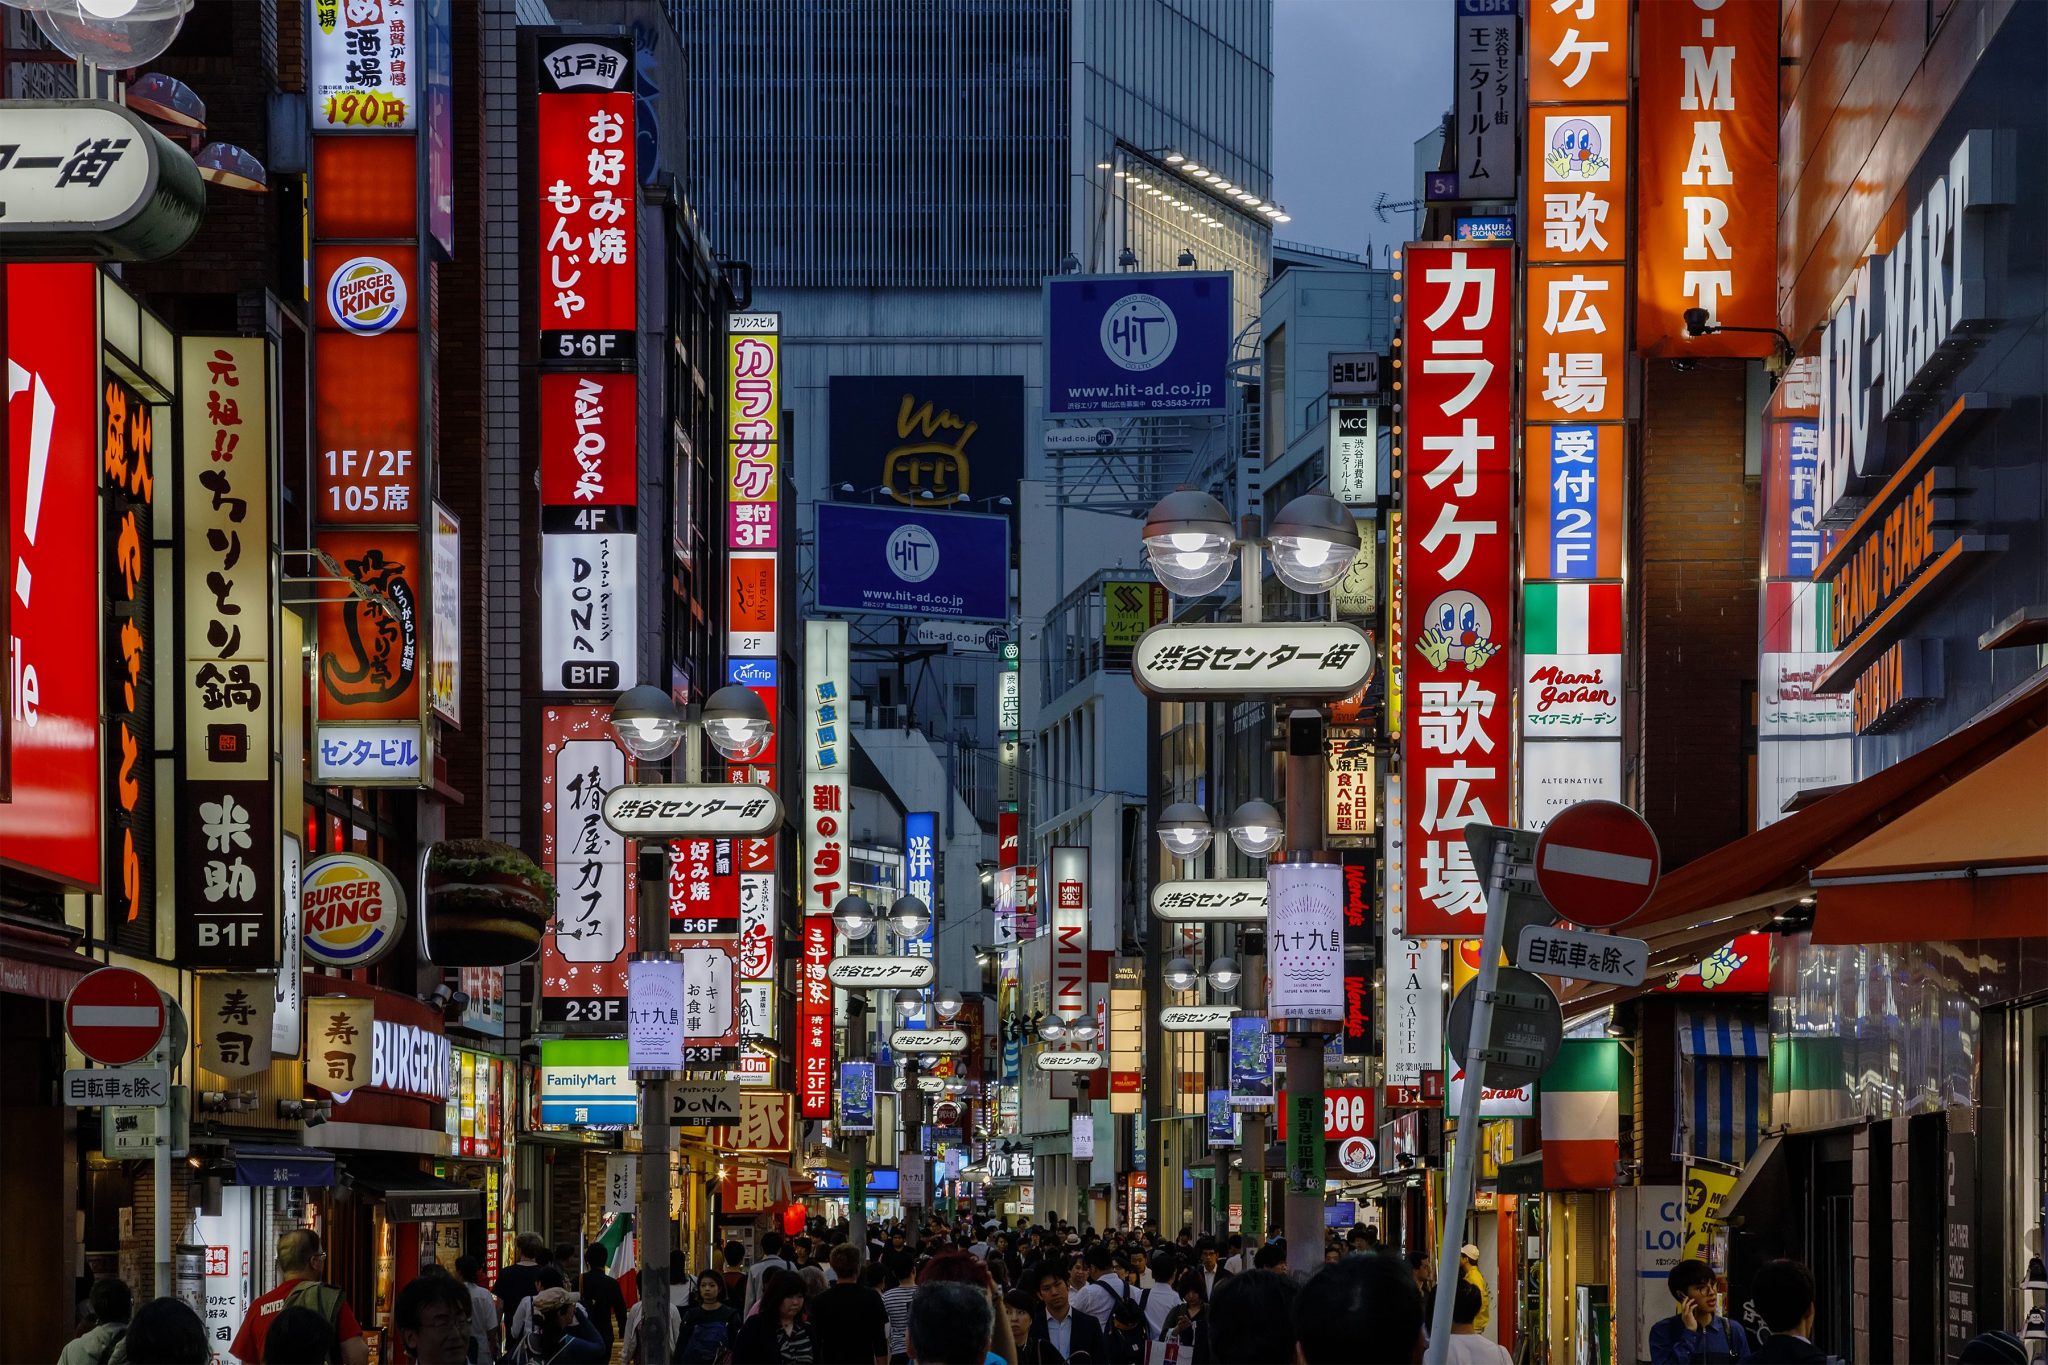 Things To Do In Shibuya 2020 - What You Can’t Miss - QUESTION JAPAN